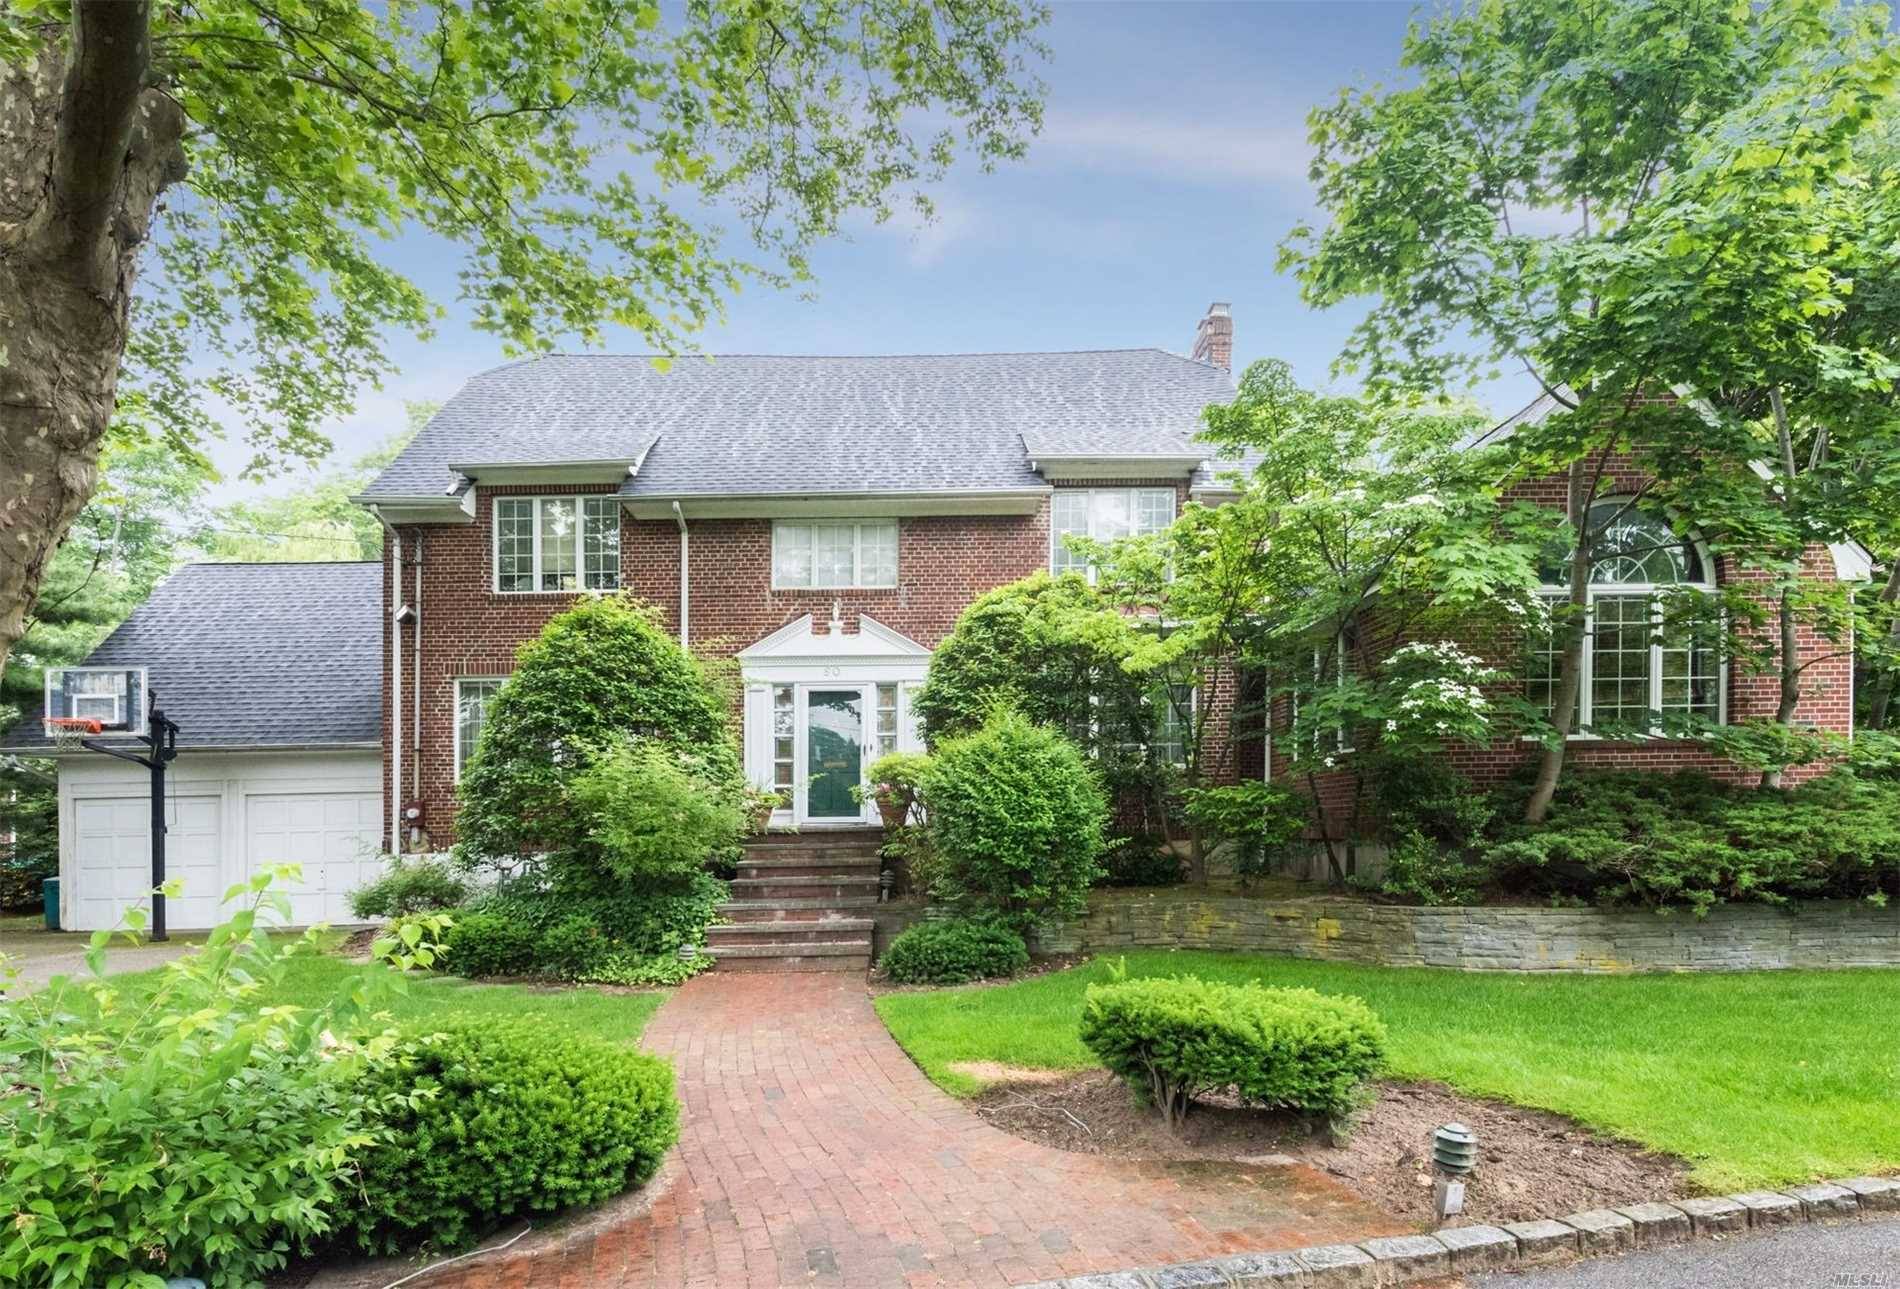 Magnificent Brick C H Colonial On A Quiet Country Lane In Close Proximity To Broadway.